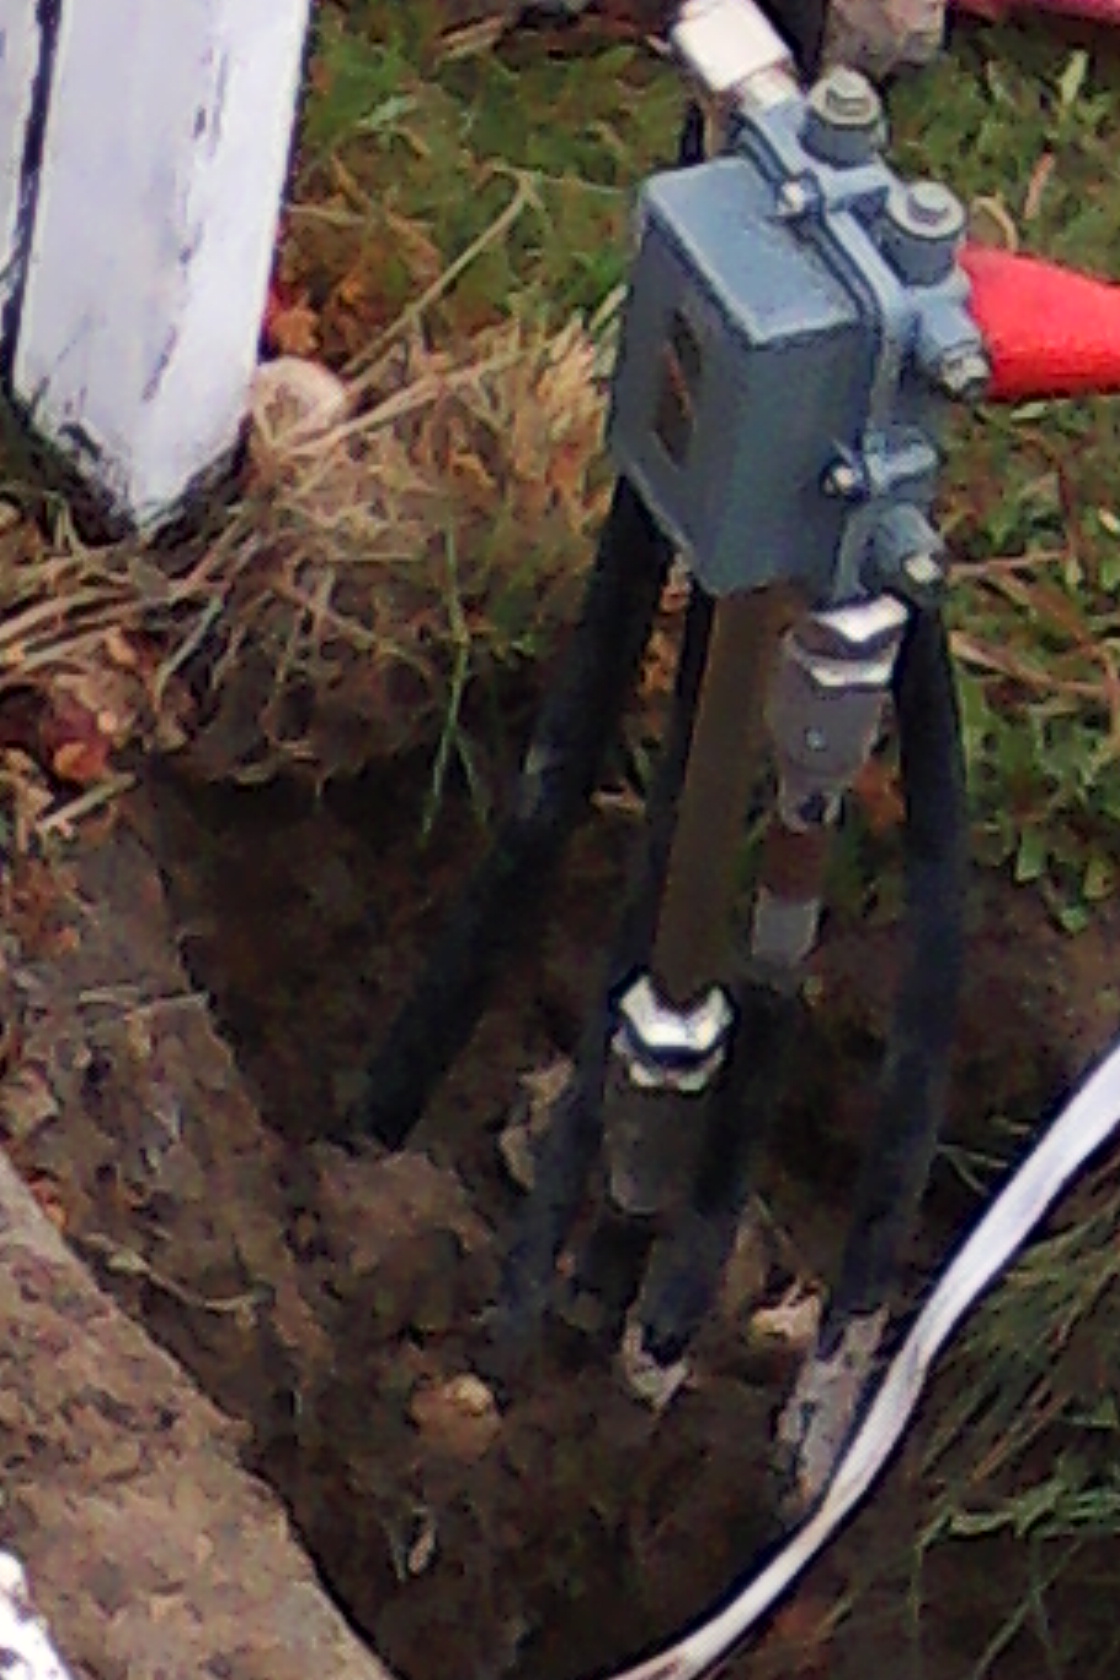 Digging around the system, before installing new fiber optic.